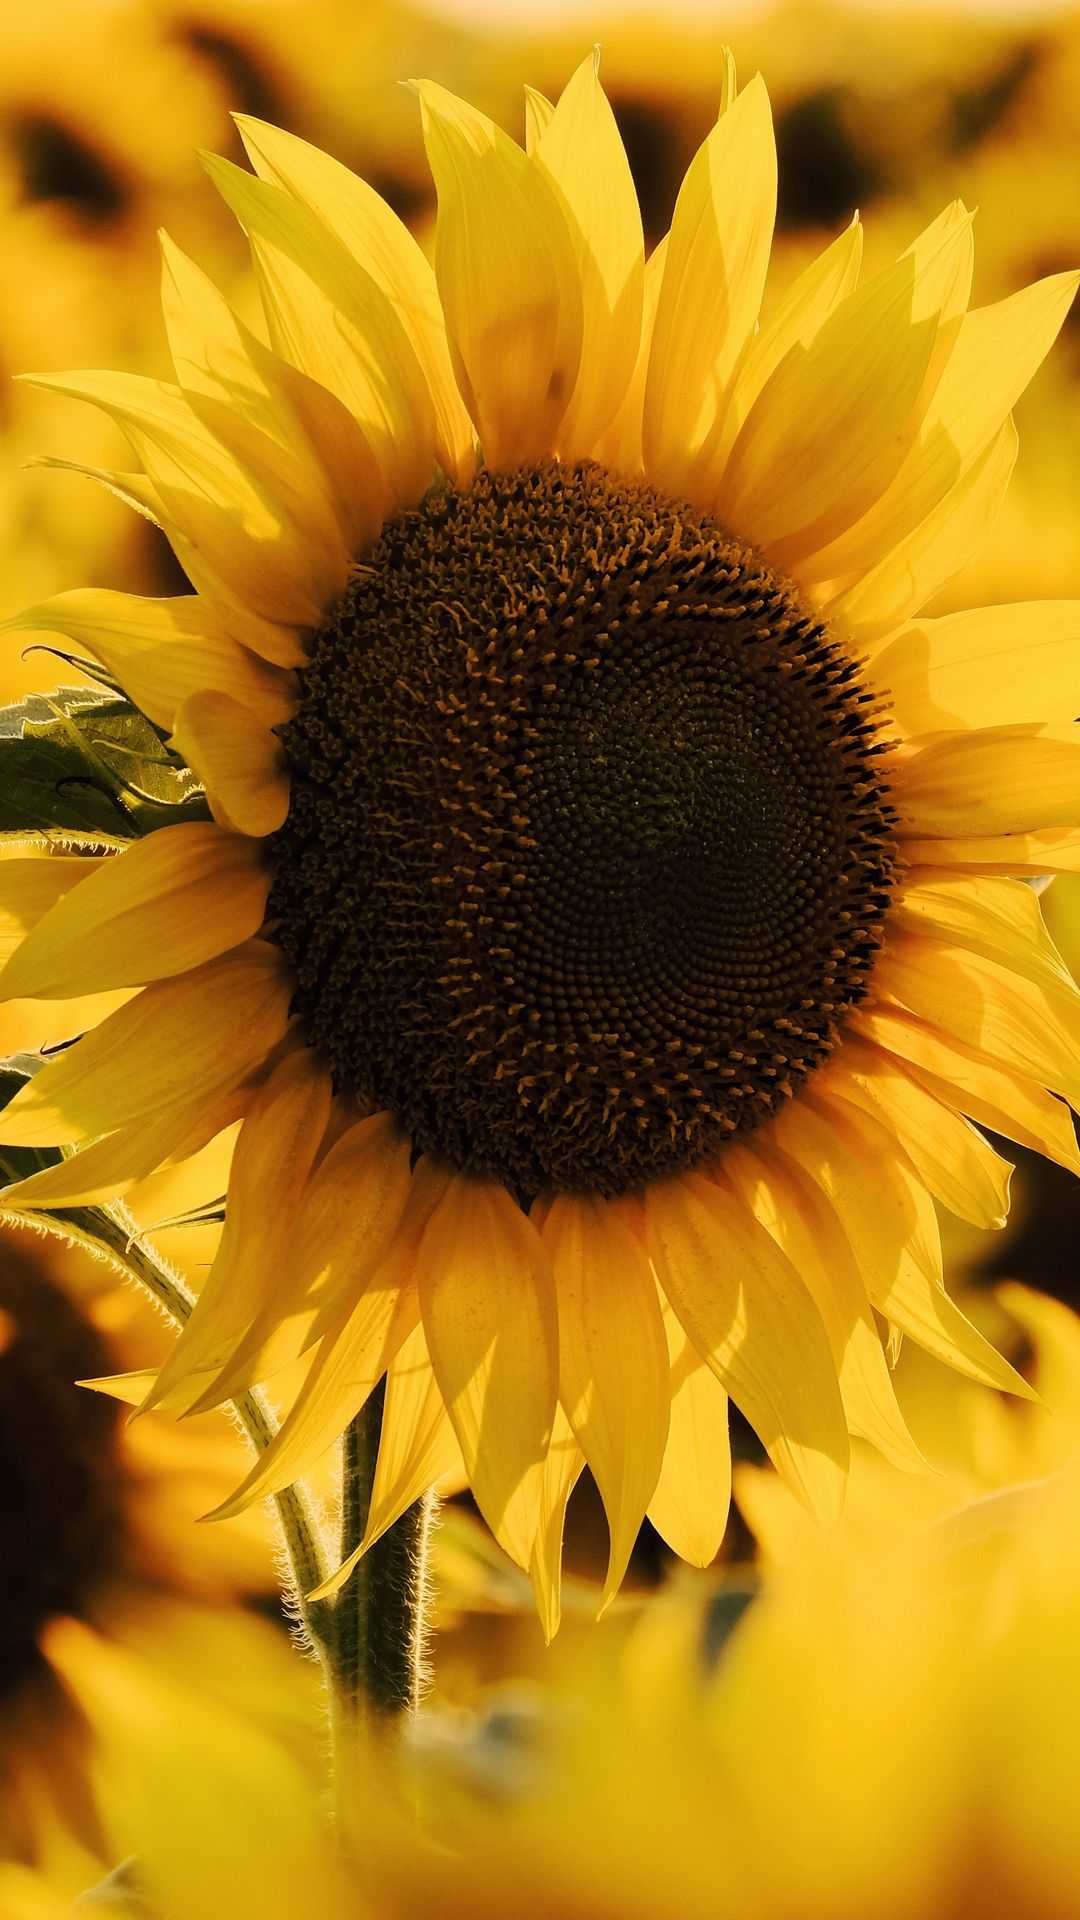 Sunflower wallpaper for iPhone with high-resolution 1080x1920 pixel. You can use this wallpaper for your iPhone 5, 6, 7, 8, X, XS, XR backgrounds, Mobile Screensaver, or iPad Lock Screen - Sunflower